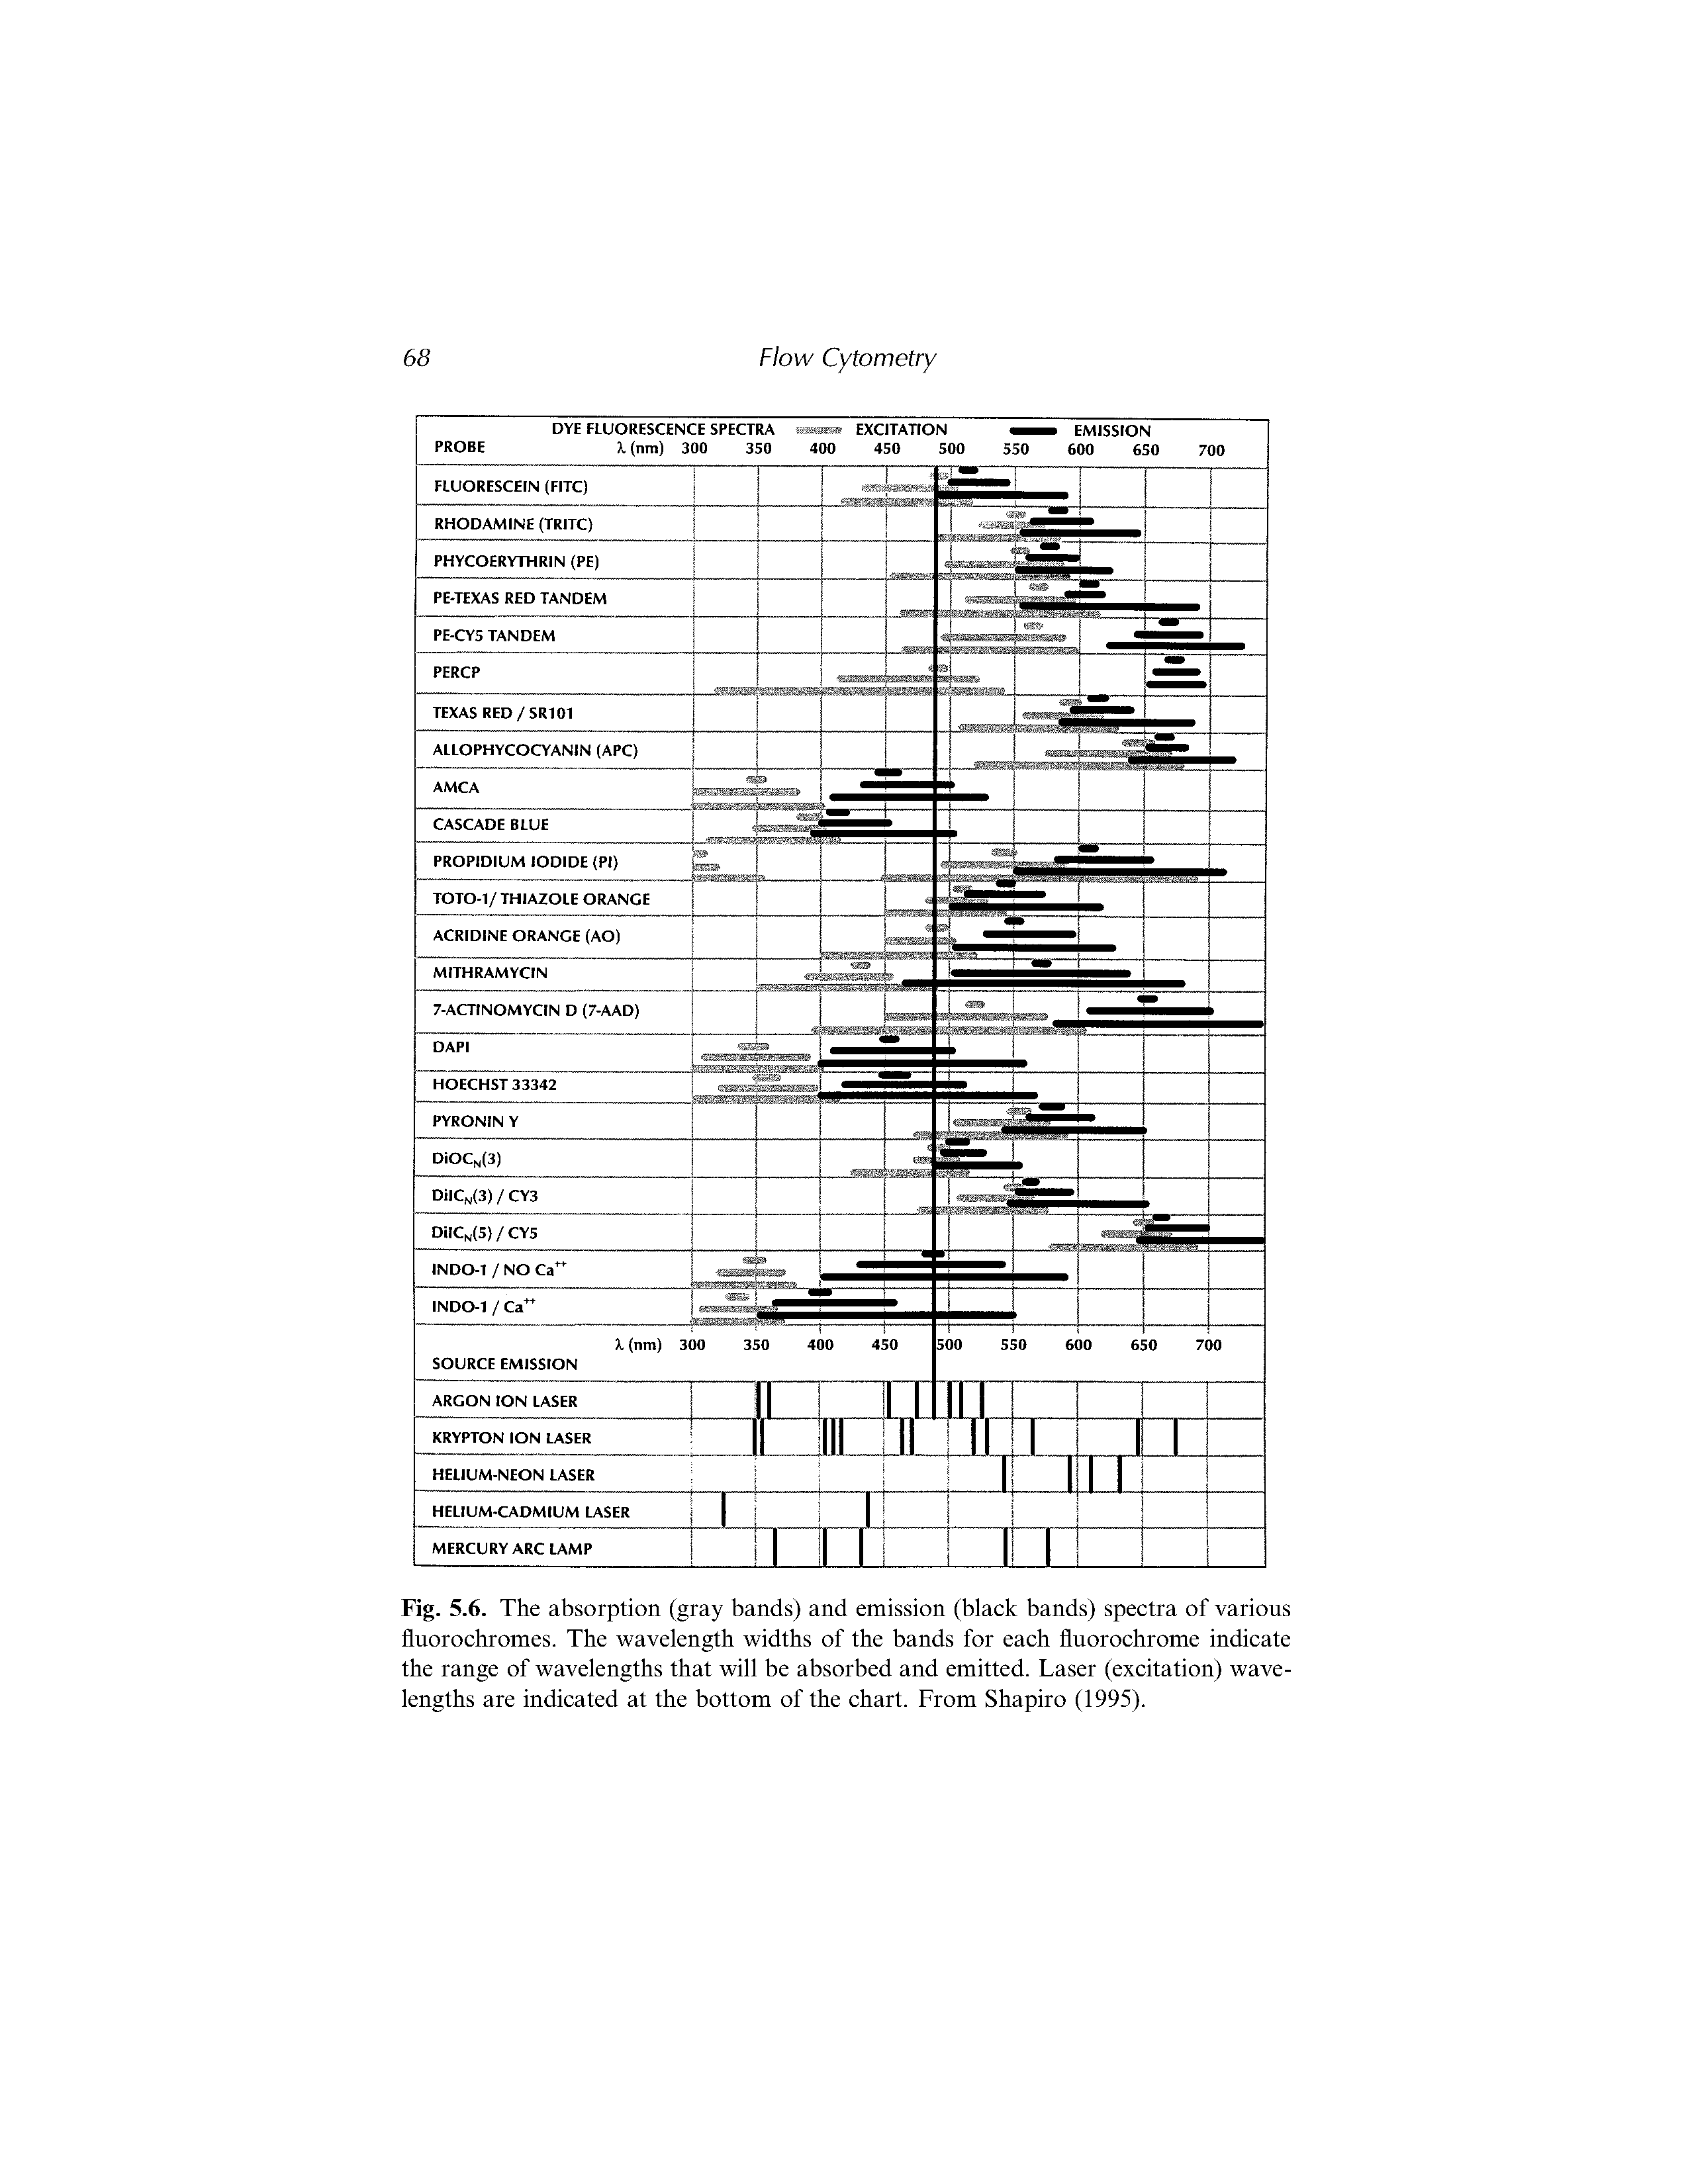 Fig. 5.6. The absorption (gray bands) and emission (black bands) spectra of various fluorochromes. The wavelength widths of the bands for each fluorochrome indicate the range of wavelengths that will be absorbed and emitted. Laser (excitation) wavelengths are indicated at the bottom of the chart. From Shapiro (1995).